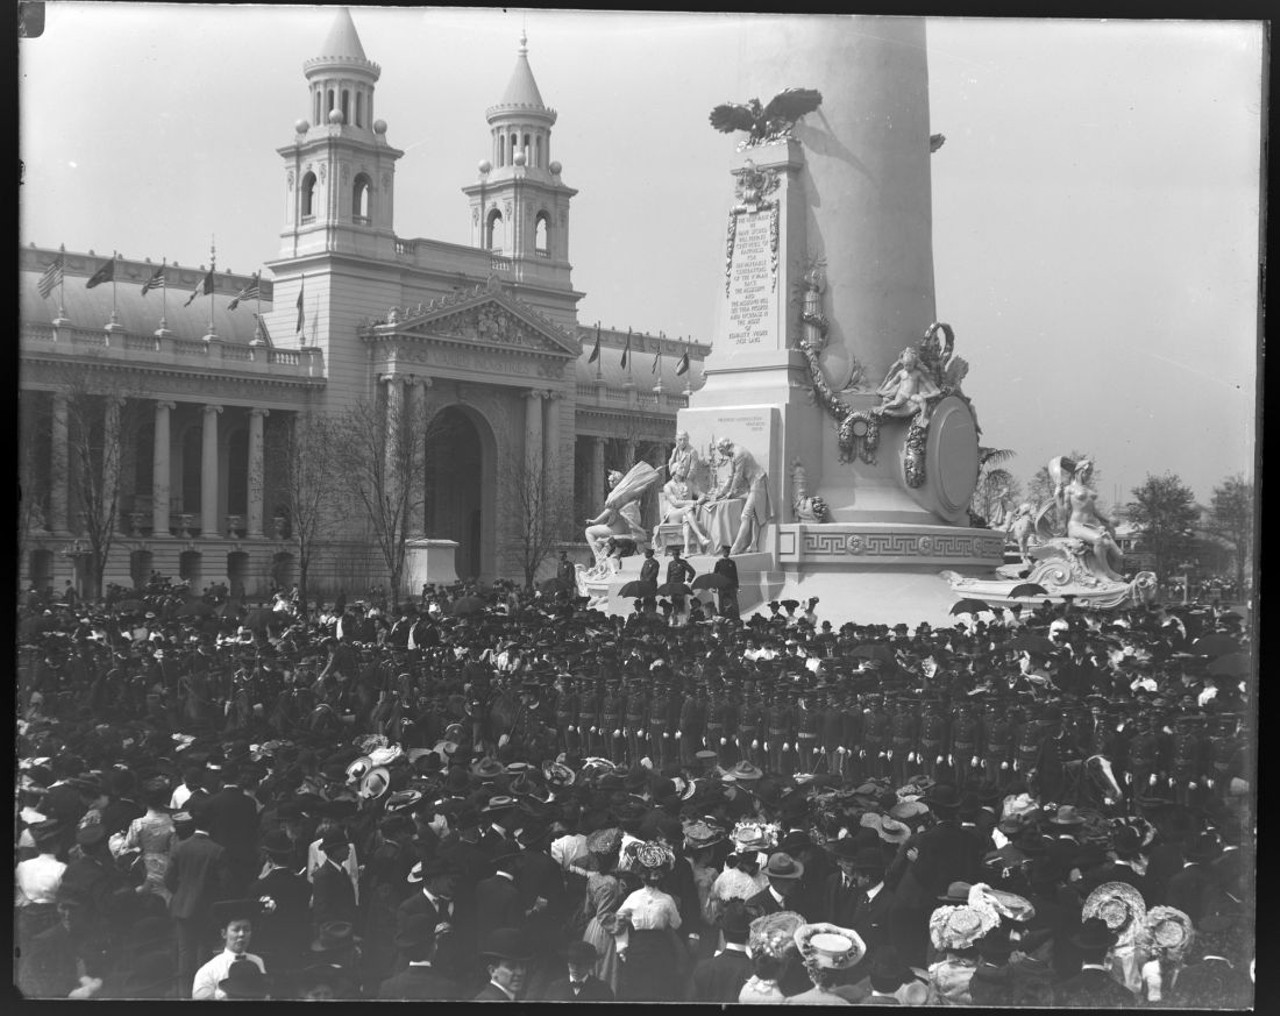 1904 WORLD'S FAIR OPENING DAY CROWDS
Find out more about this photo at MoHistory.org.